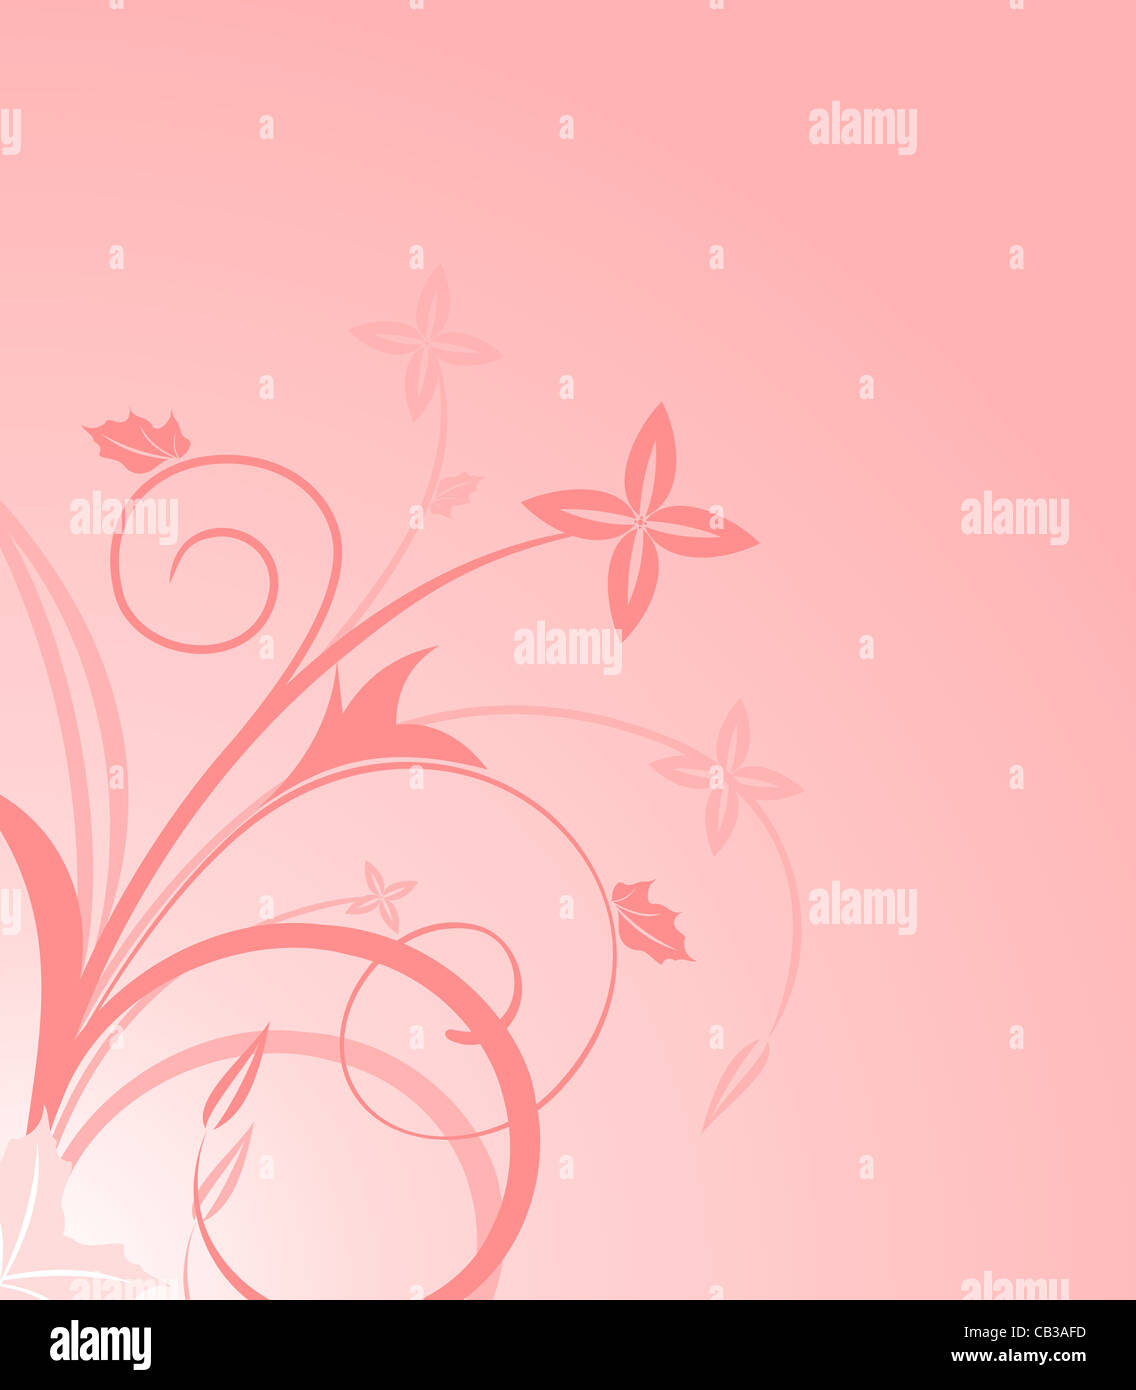 Cute floral elements for design - vector Stock Photo